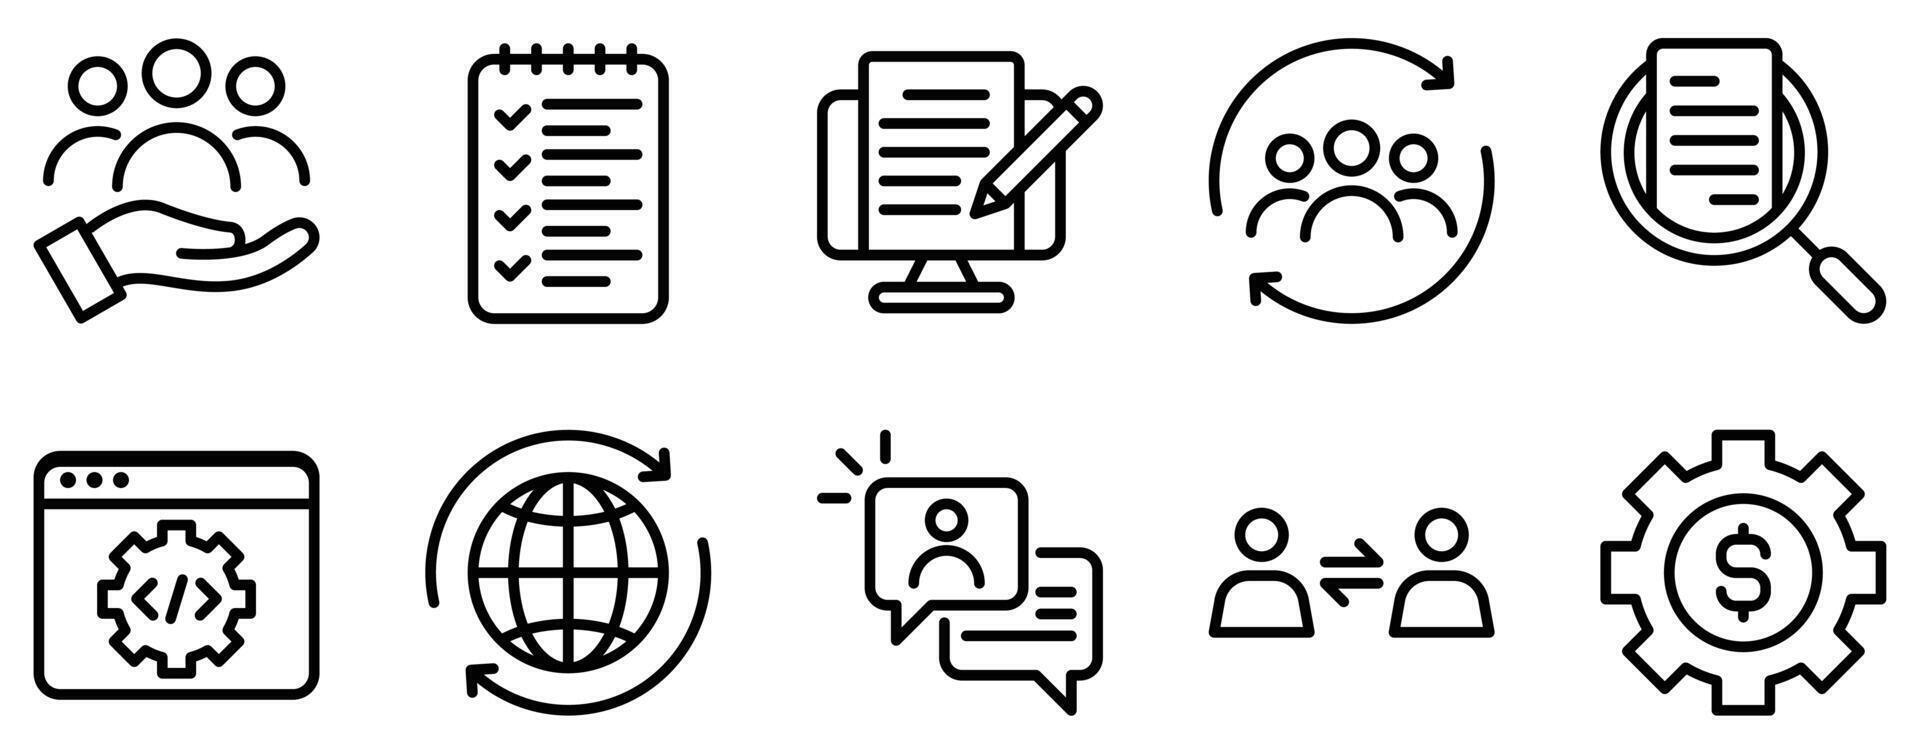 digital nomad icon line style set collection vector